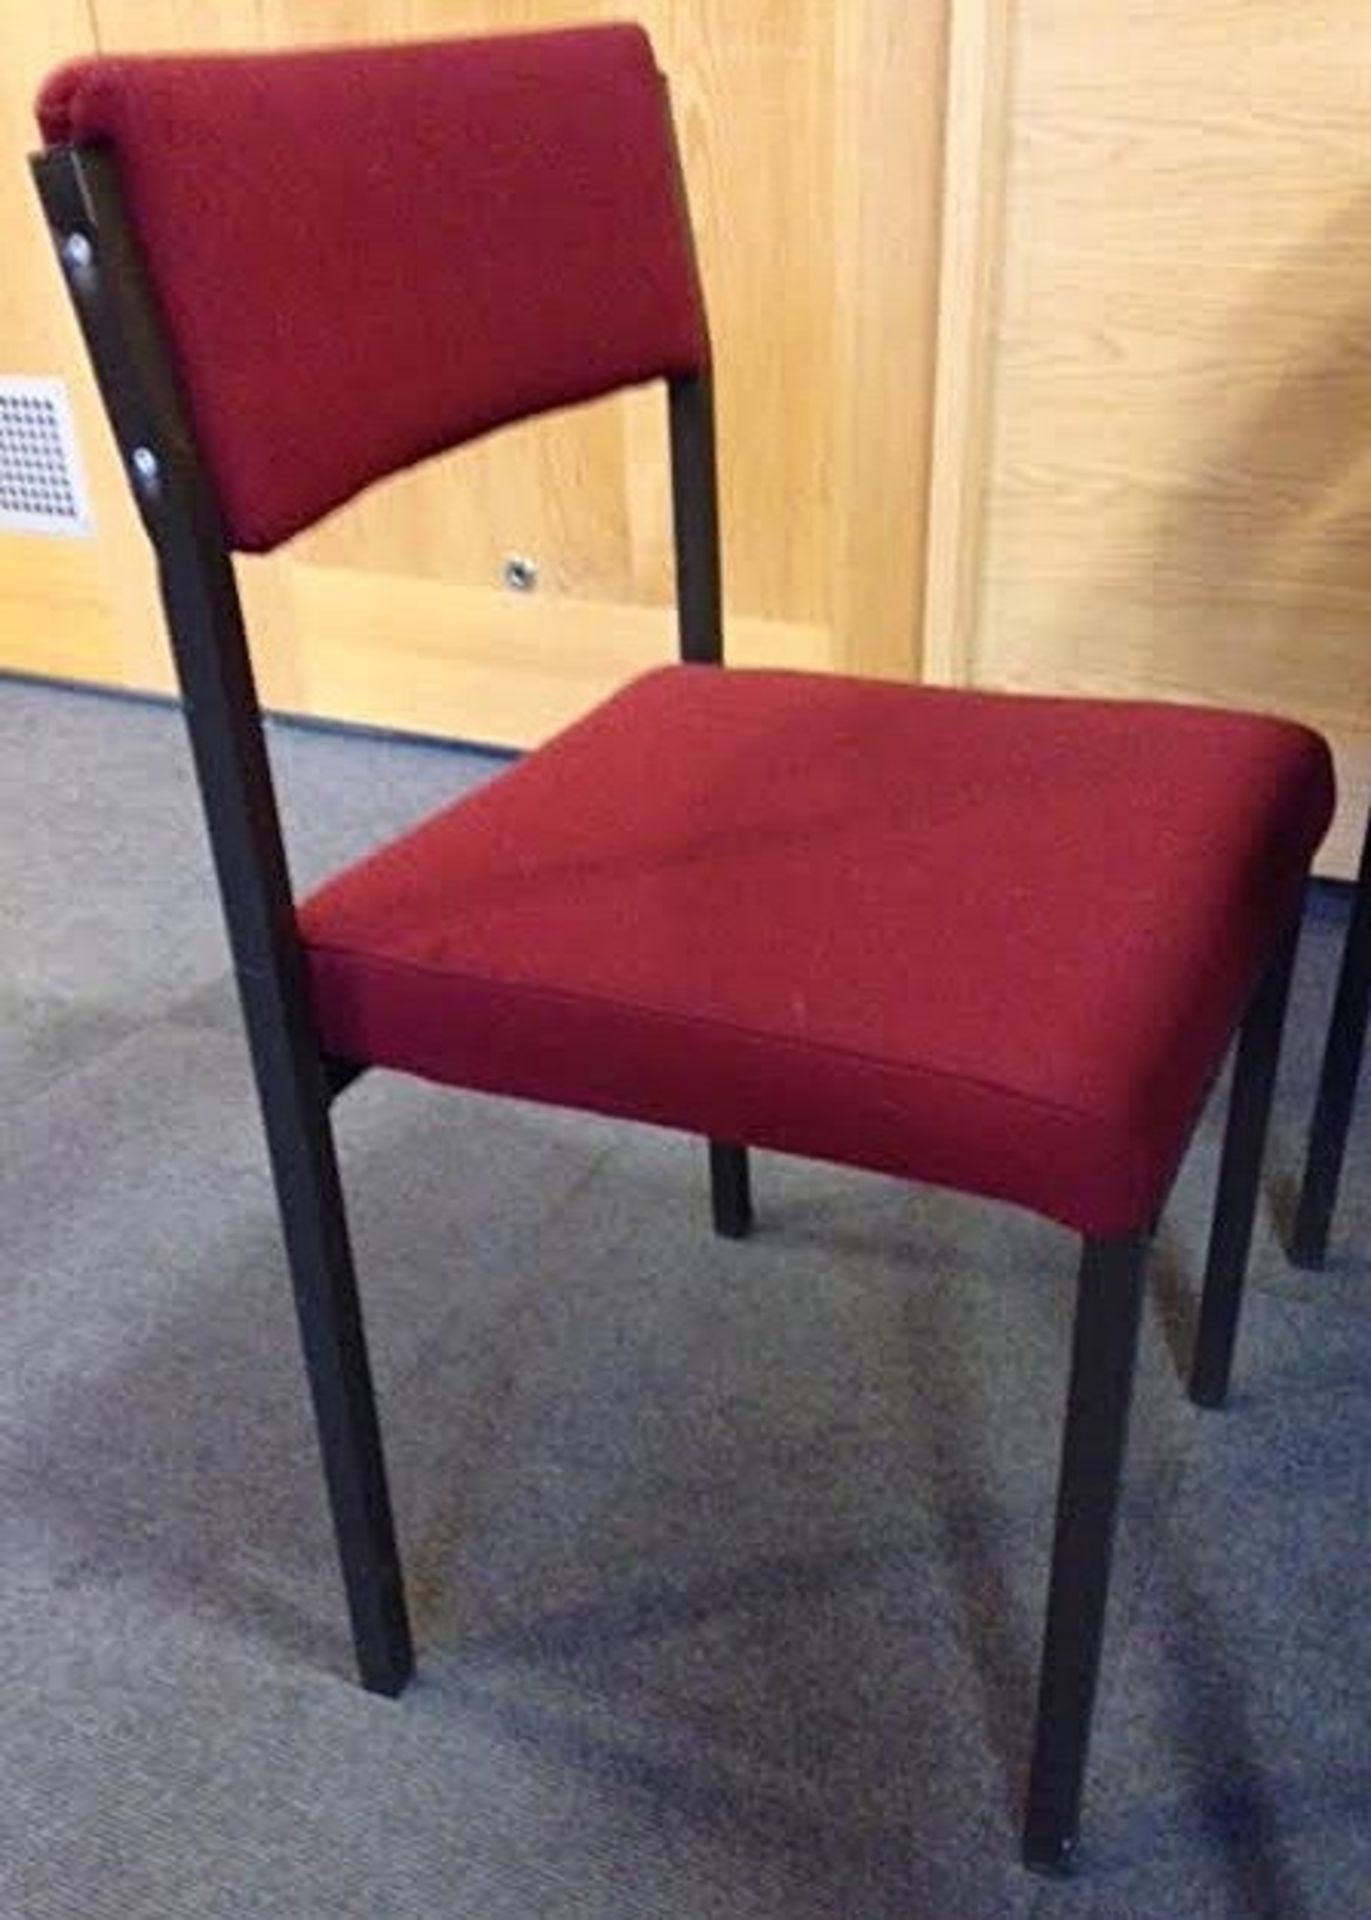 10 x Stacking Chairs - Burgundy Fabric - All In Good Condition - General Purpose Stacking Chairs For - Image 2 of 6